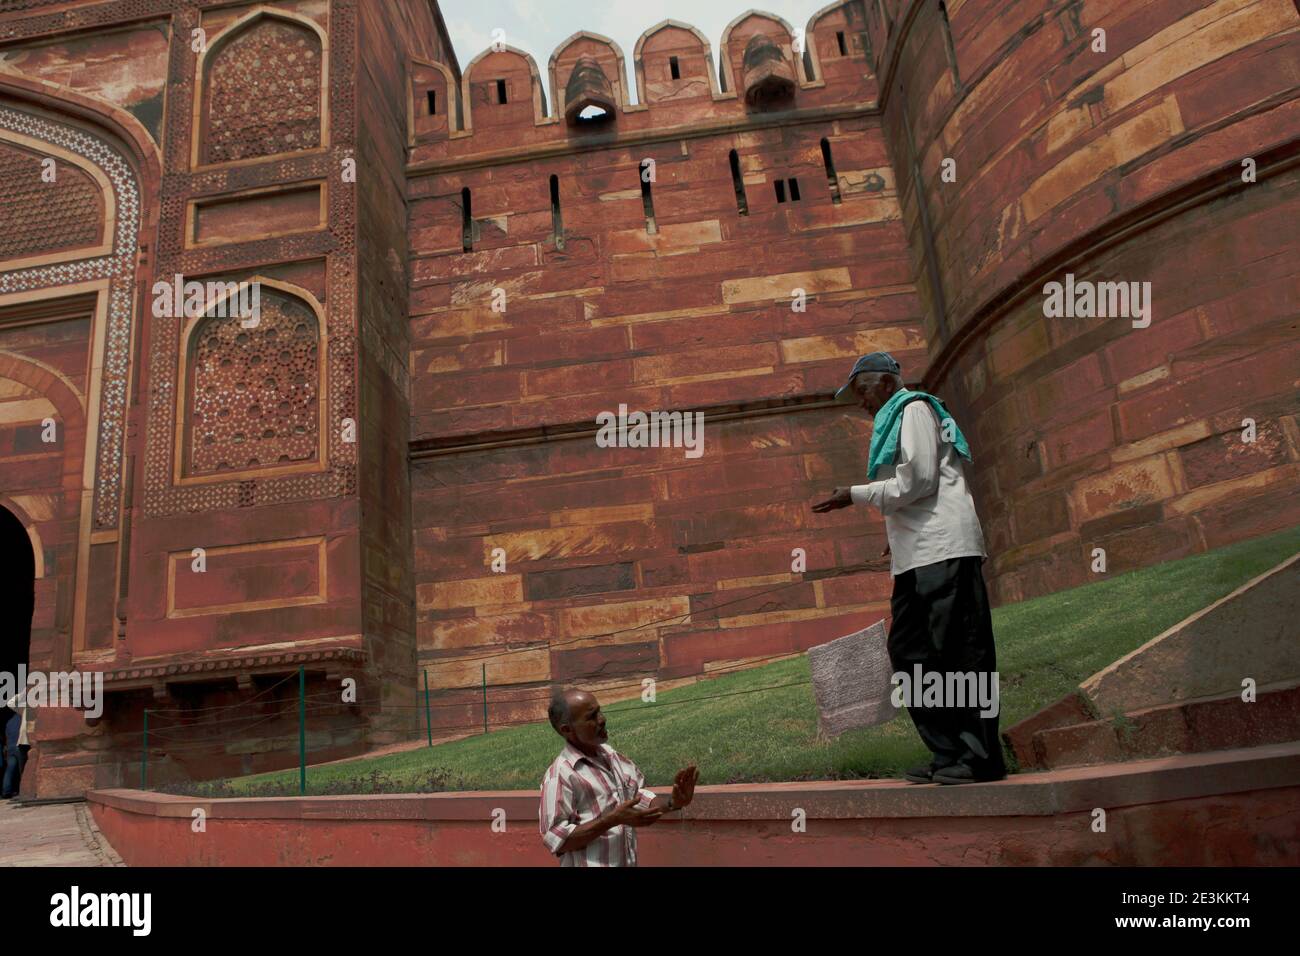 Men having conversation at the lawn before the Amar Singh Gate of Agra Fort in Agra, Uttar Pradesh, India. Stock Photo